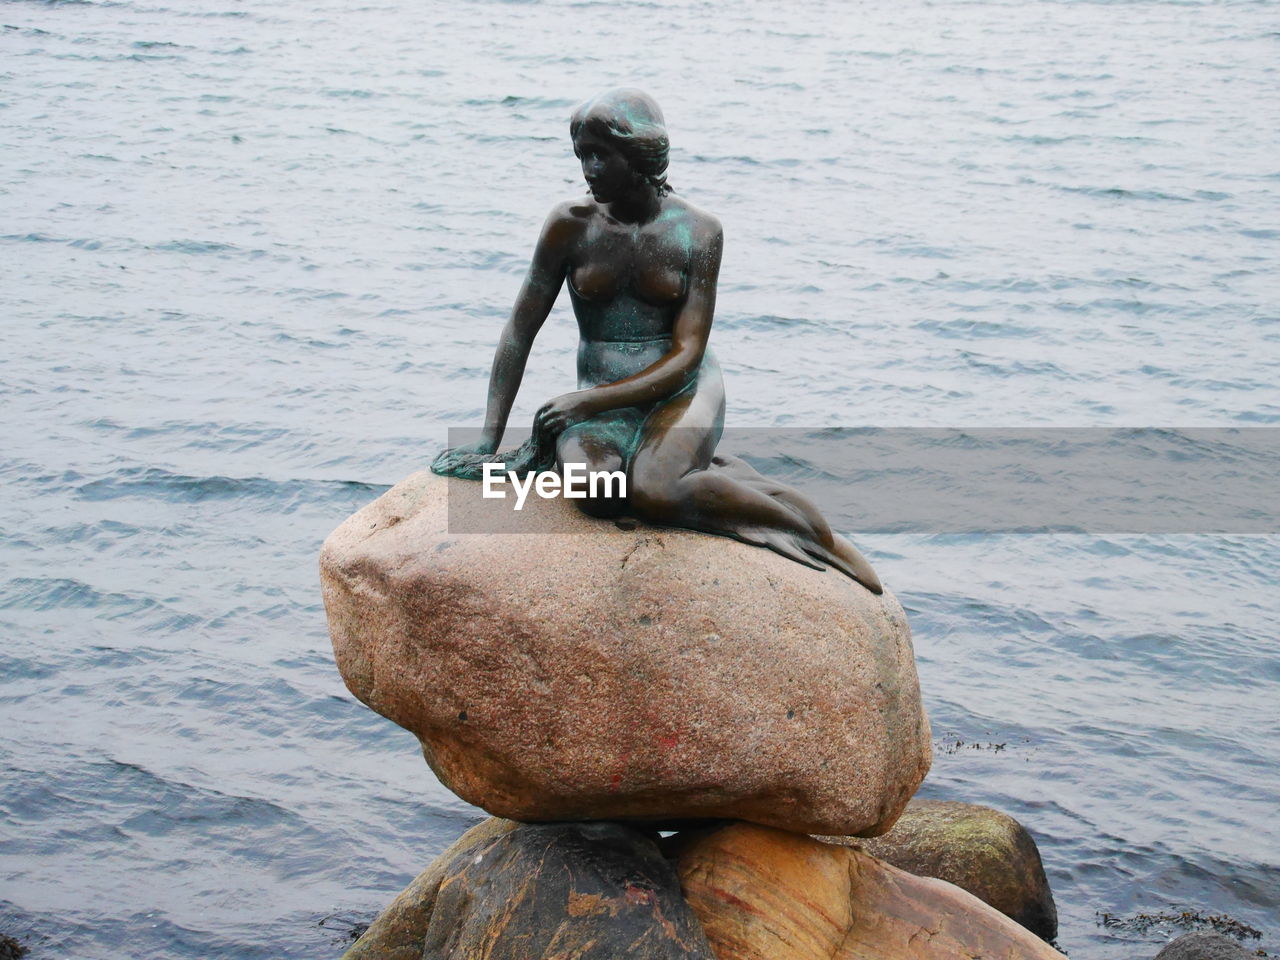 STATUE OF MAN SITTING IN SEA